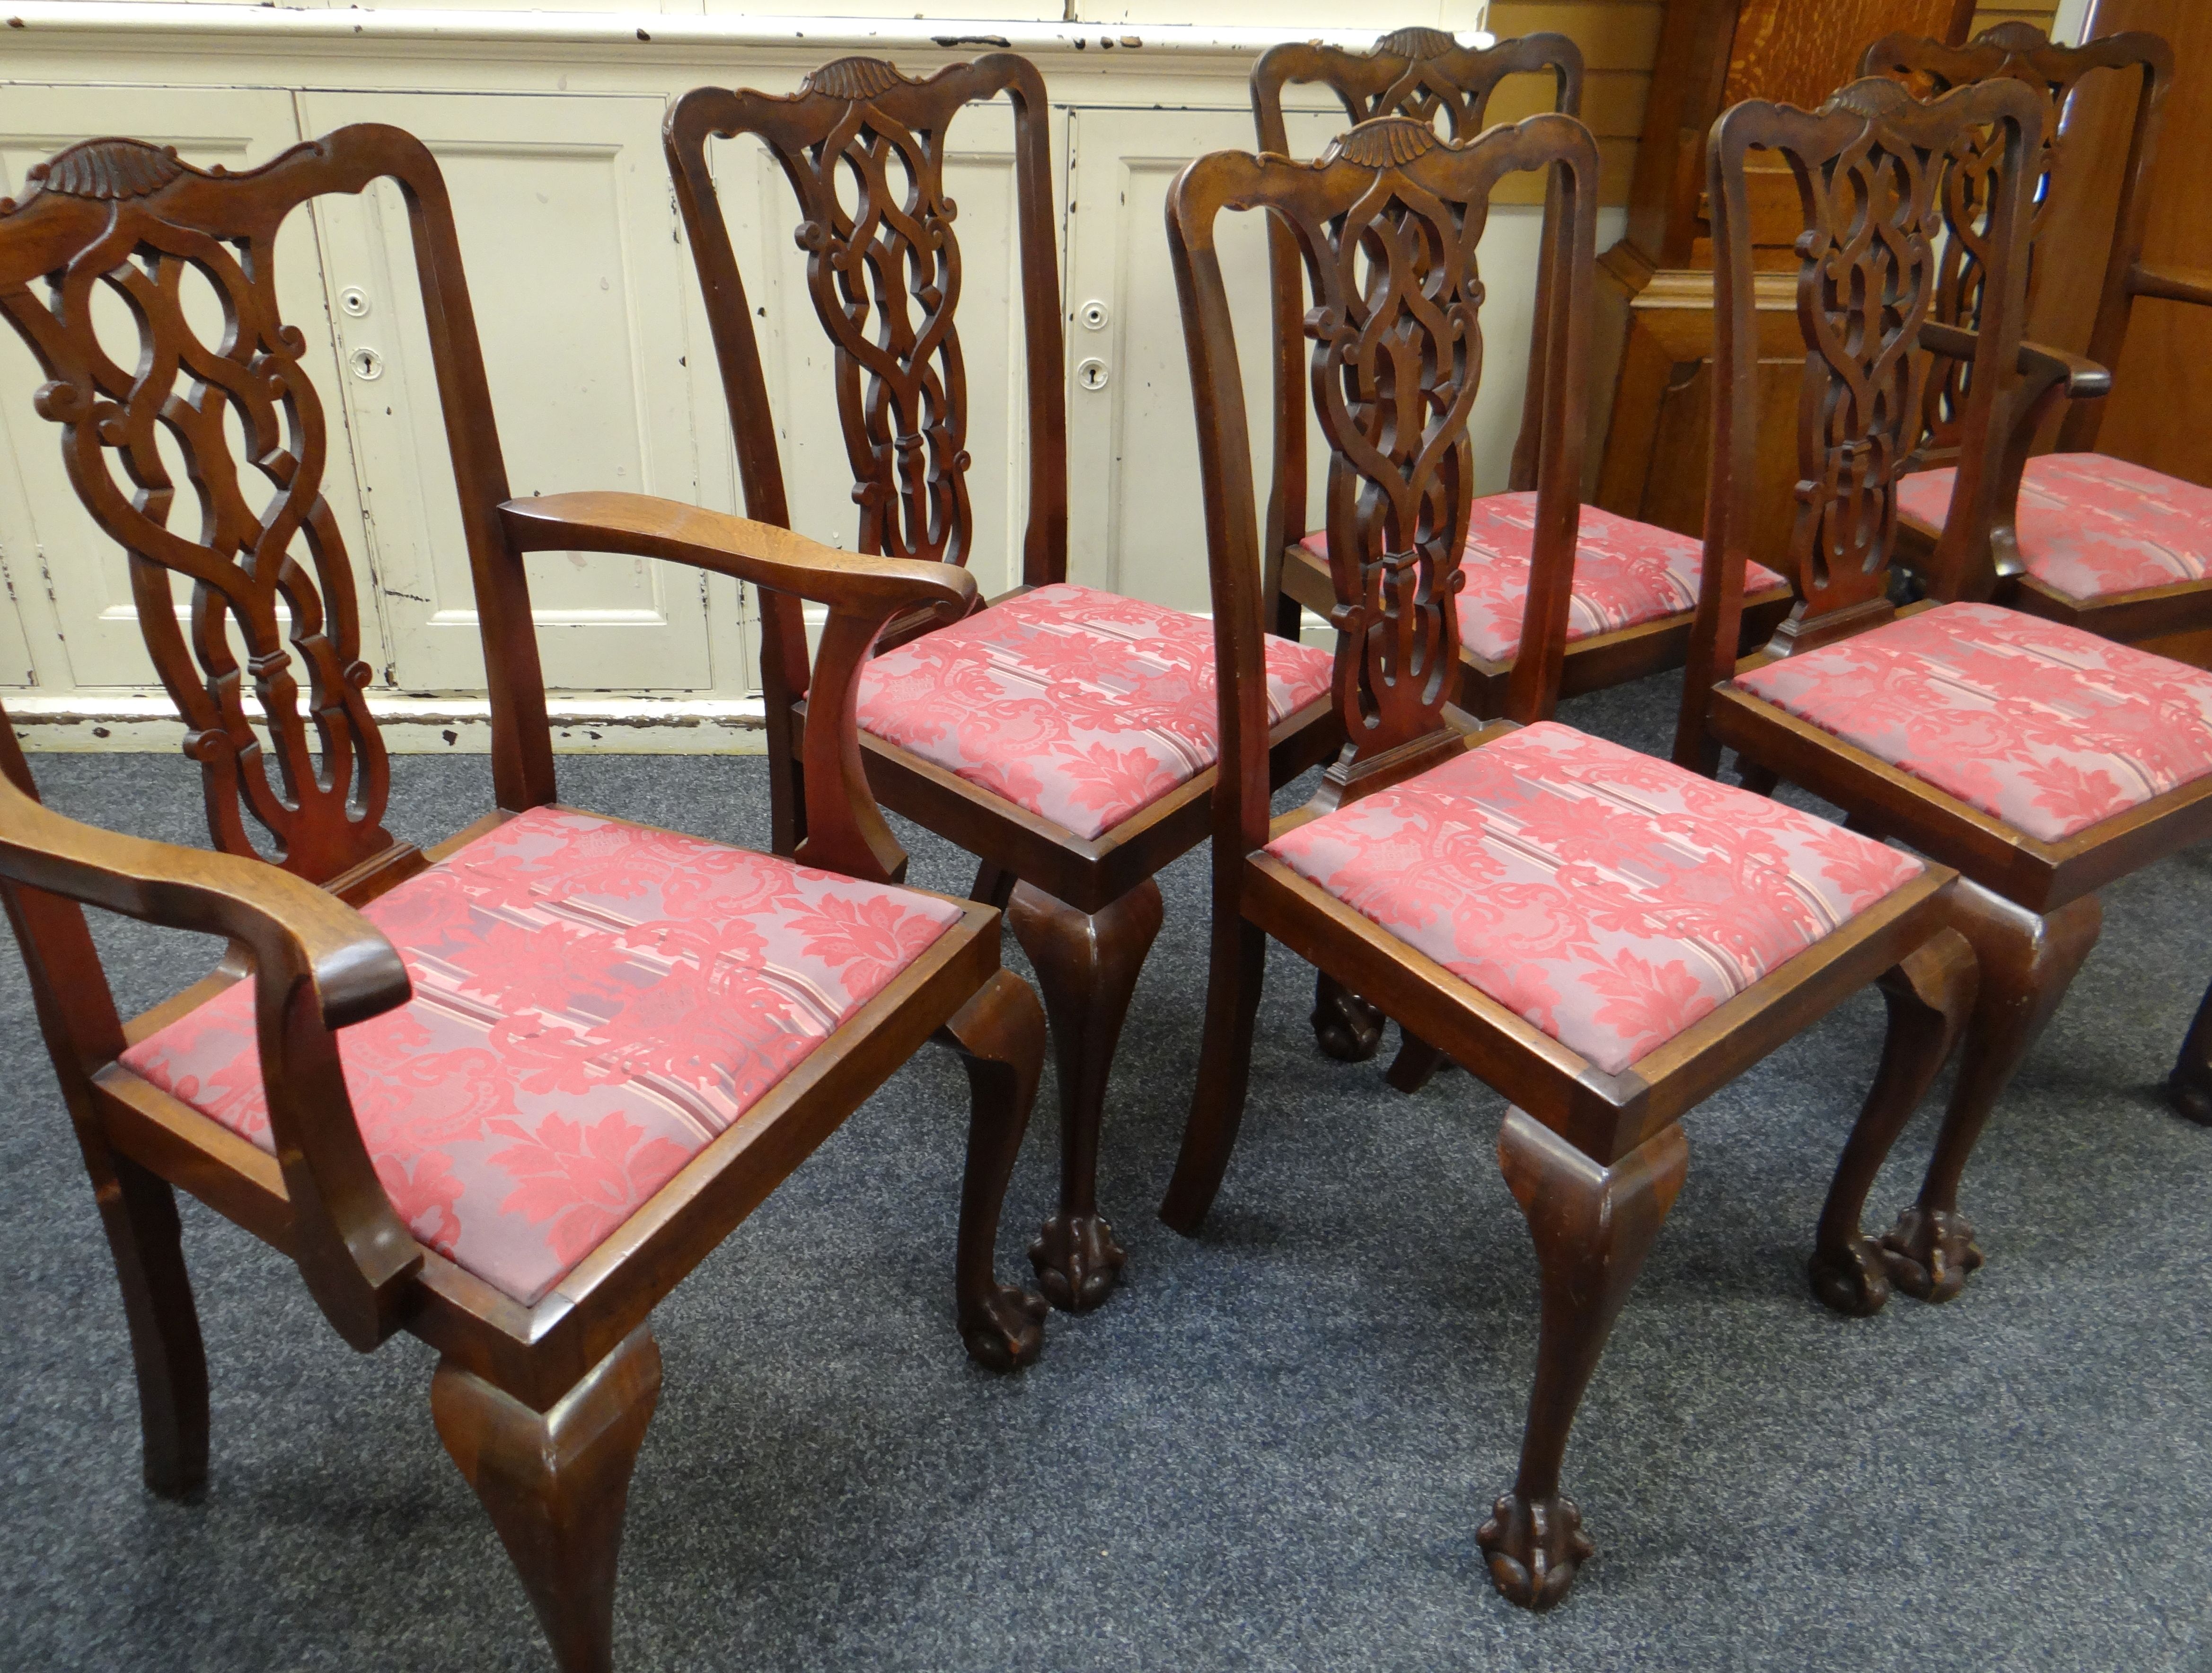 A SET OF SIX CHIPPENDALE-STYLE DINING CHAIRS with elaborate backs and ball and claw feet having drop